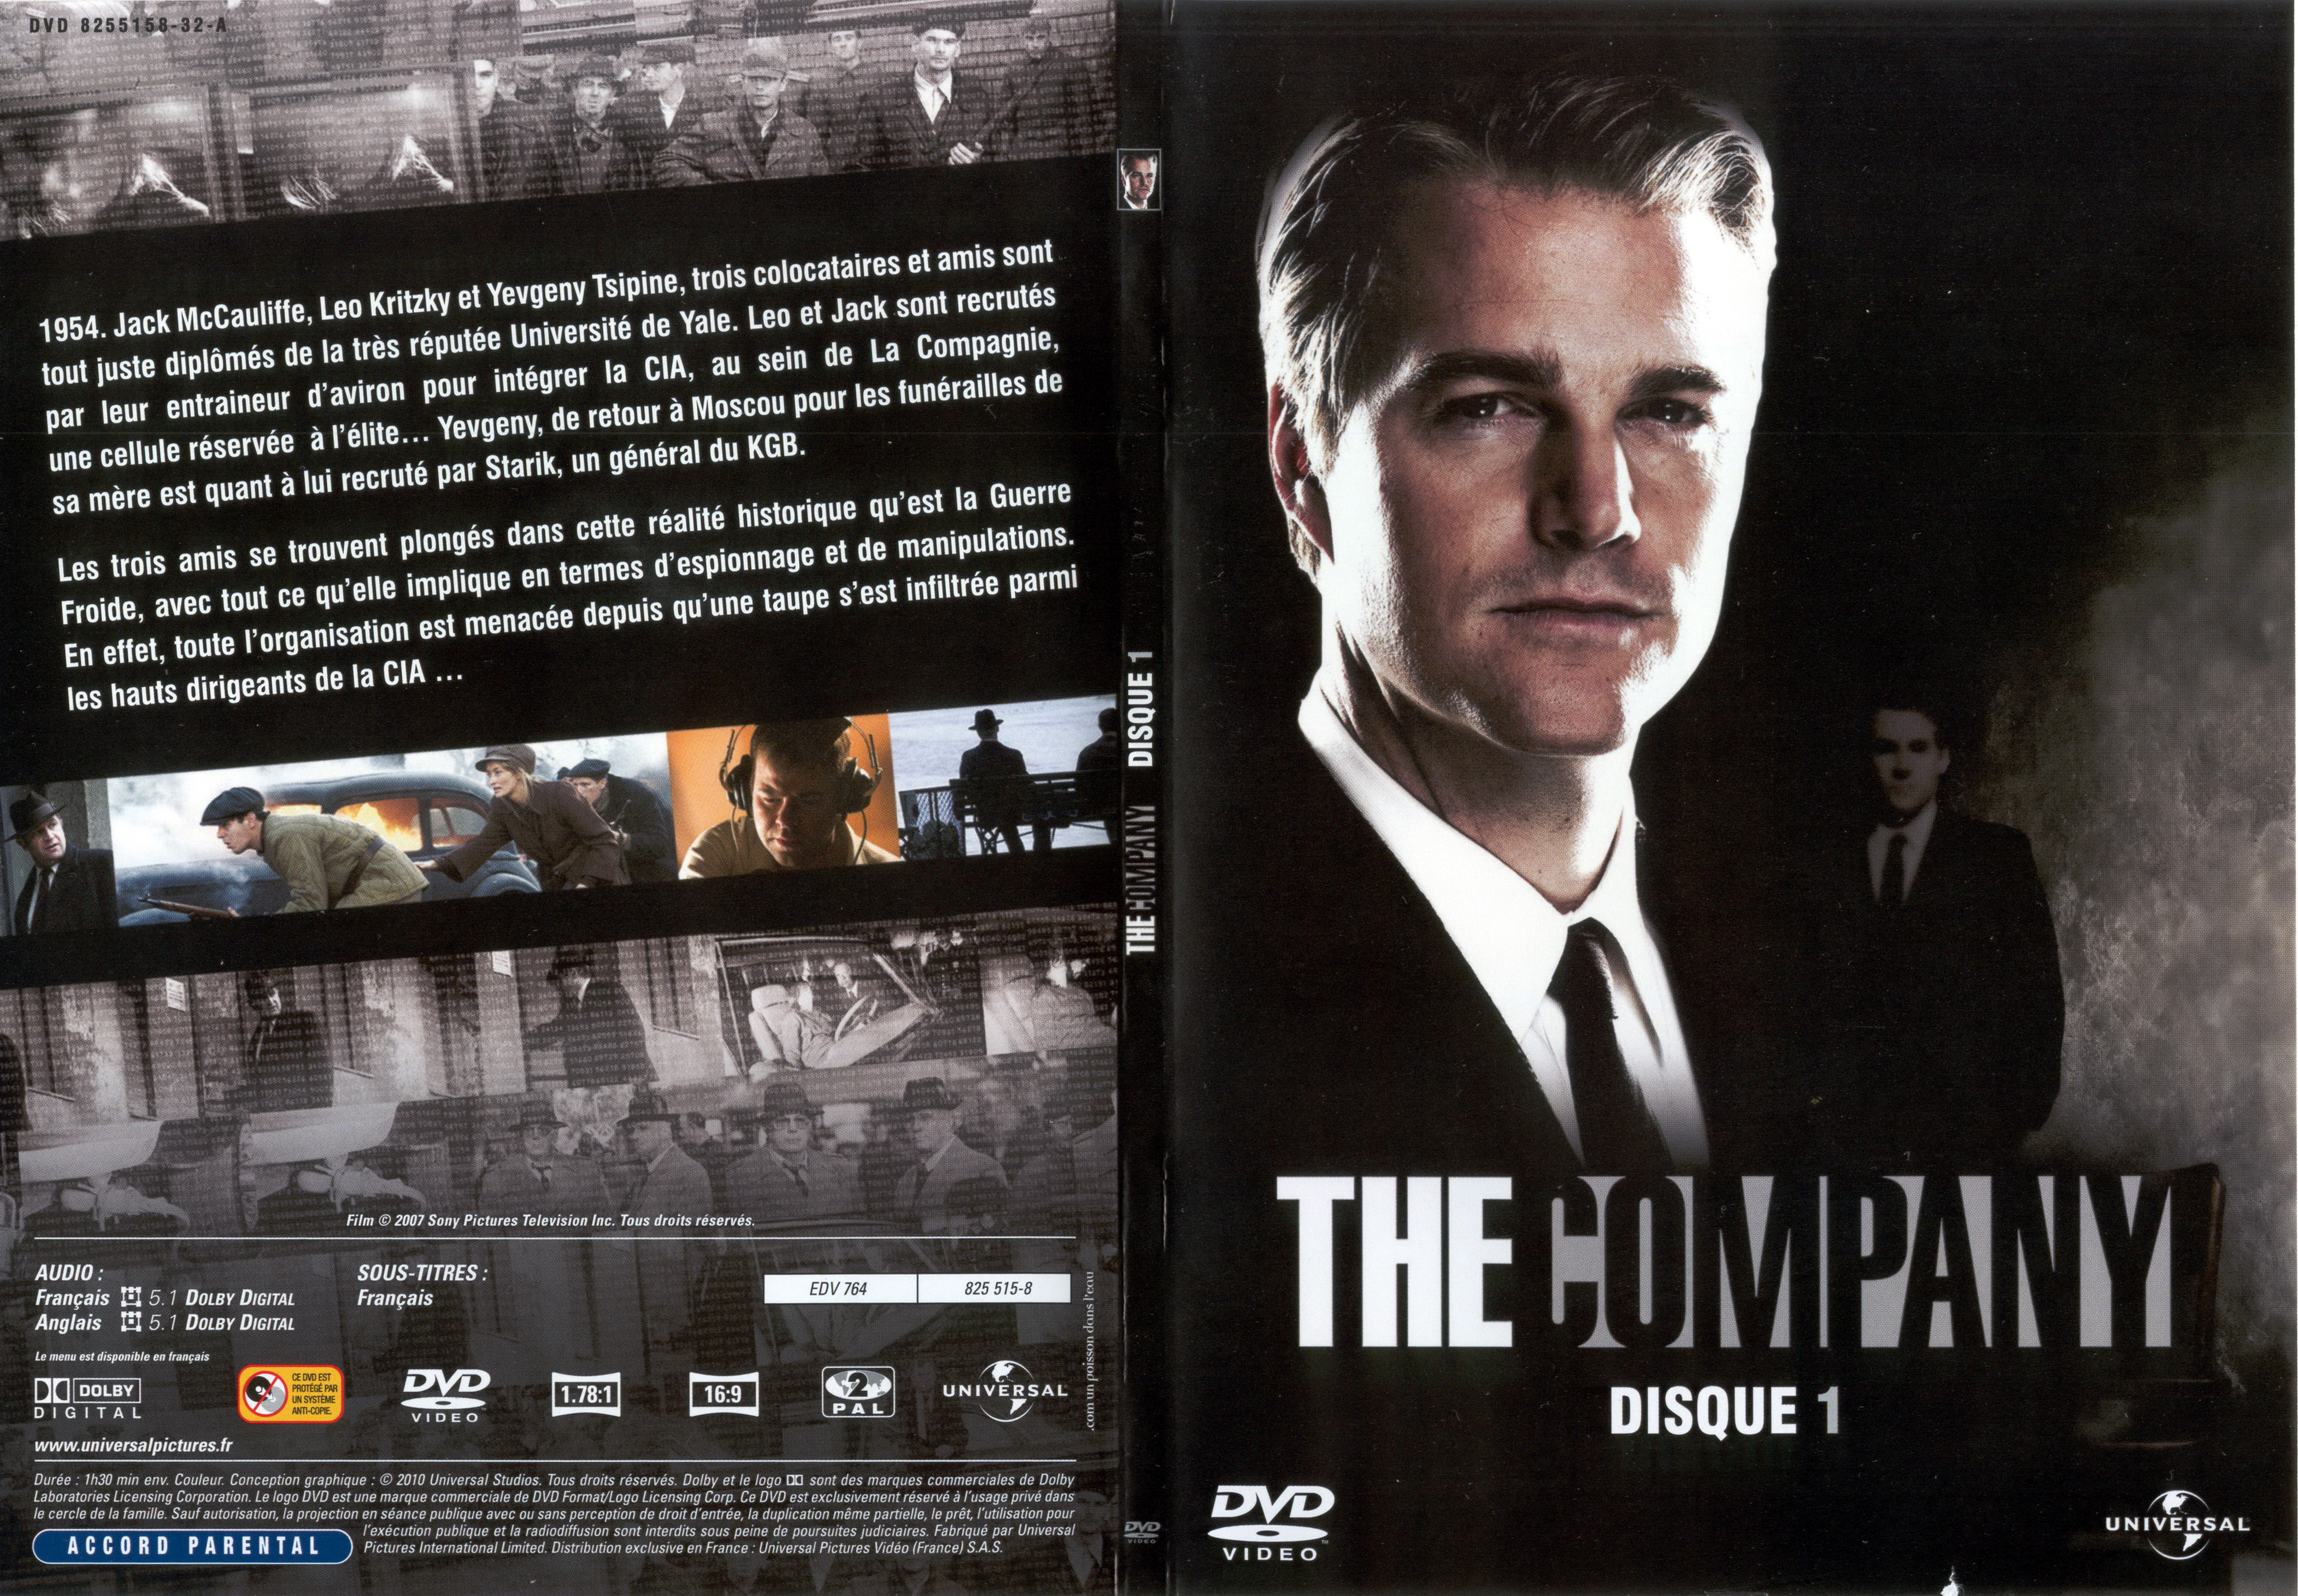 Jaquette DVD The company DVD 1